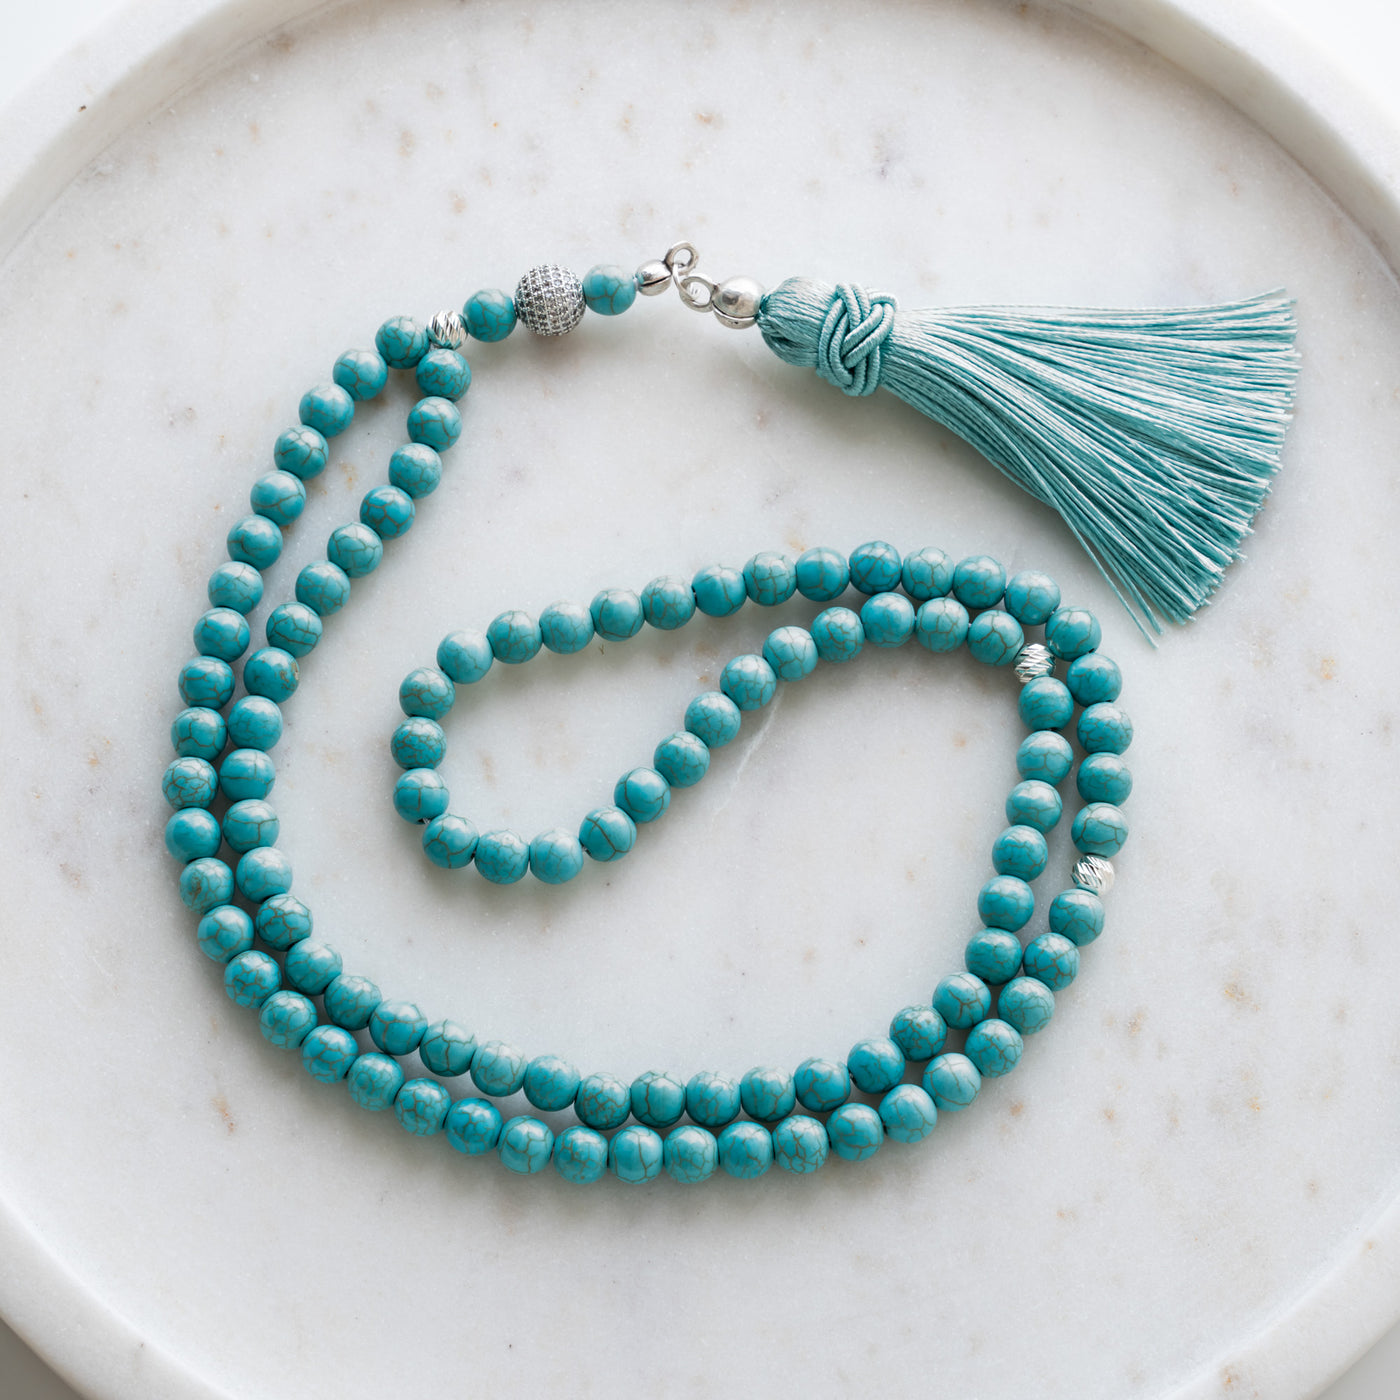 99 Prayer beads - Turquoise Gemstone. All Seven Sajada Misbaha are made with cubic zirconia and sterling silver separators. The Tasbih are handmade in Turkey with big attention to details and quality.